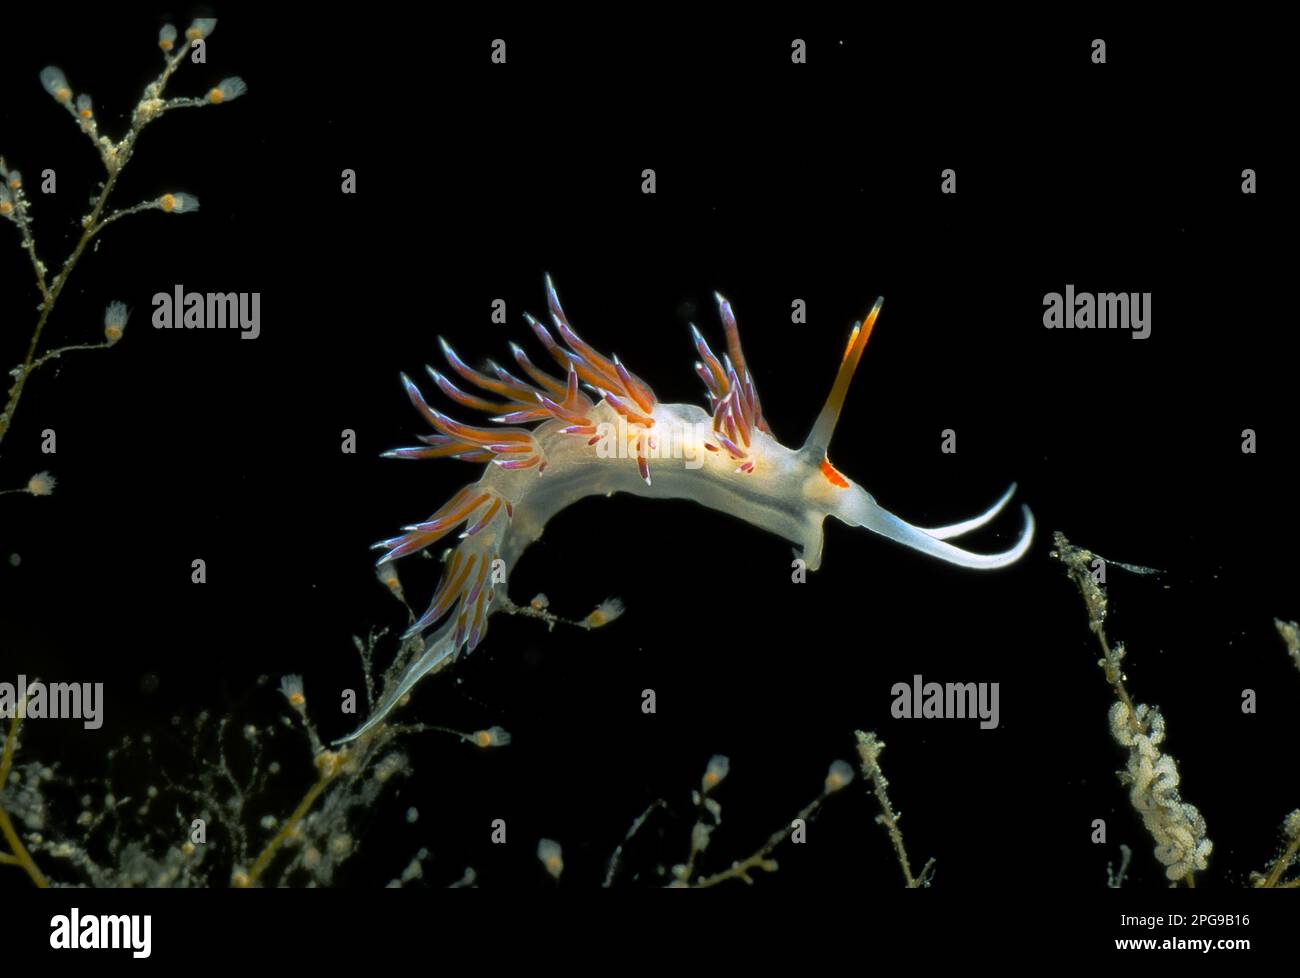 Hervia costai feeds exclusively on the hydroid Eudendrium on which it is photographed. Here it carries out its entire life cycle. Nudibranch, Stock Photo